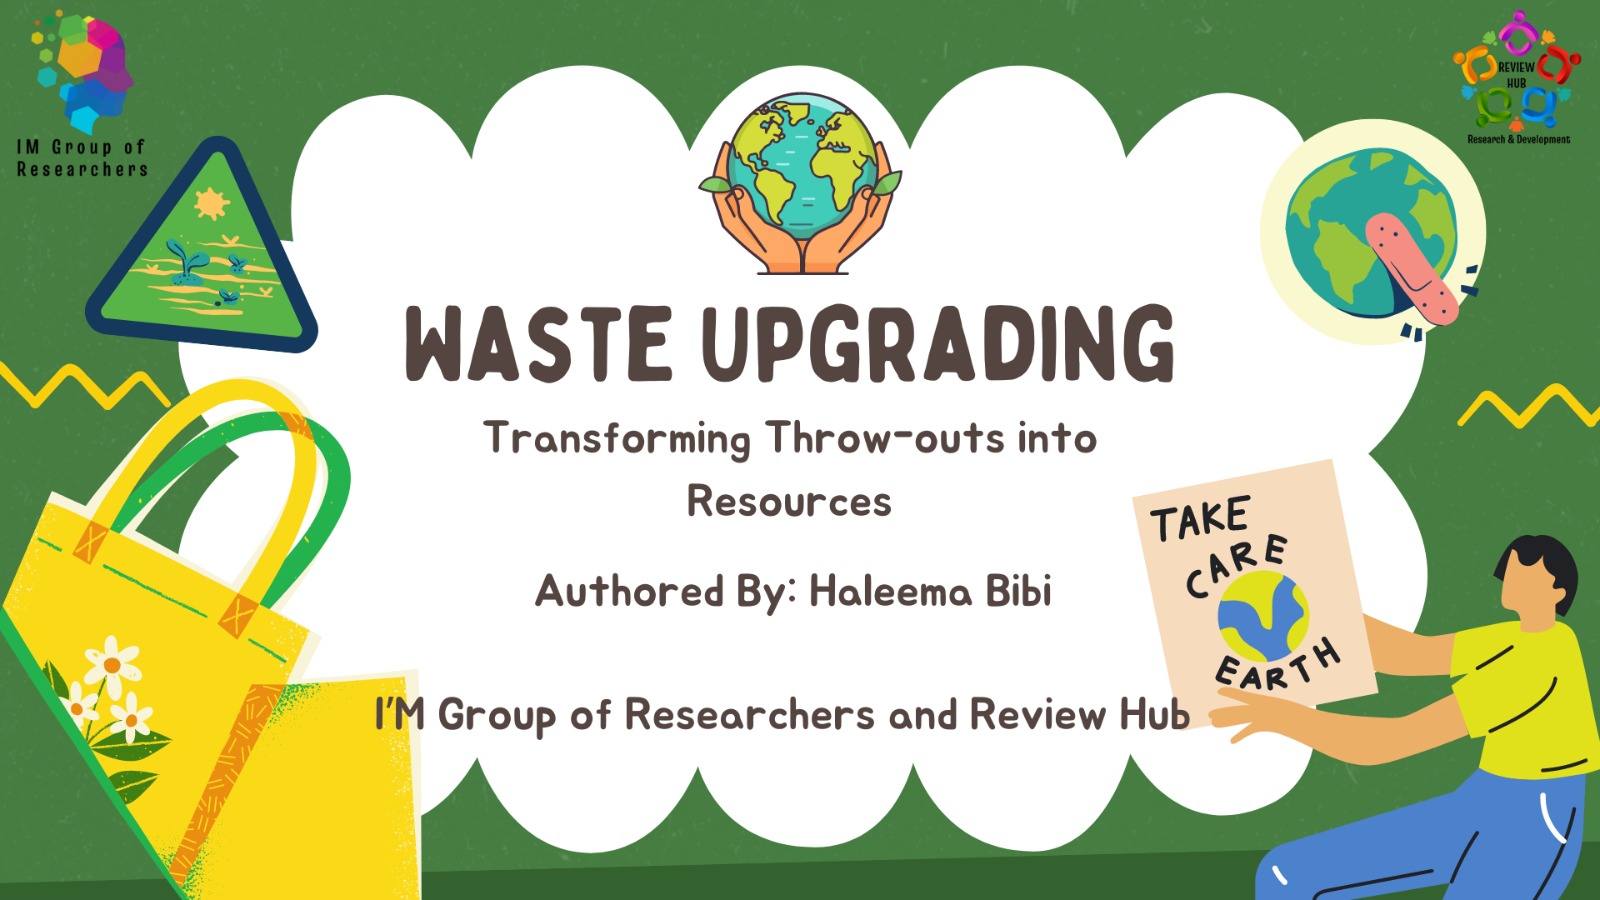 Waste Upgrading: Transforming Throw-outs into Resources